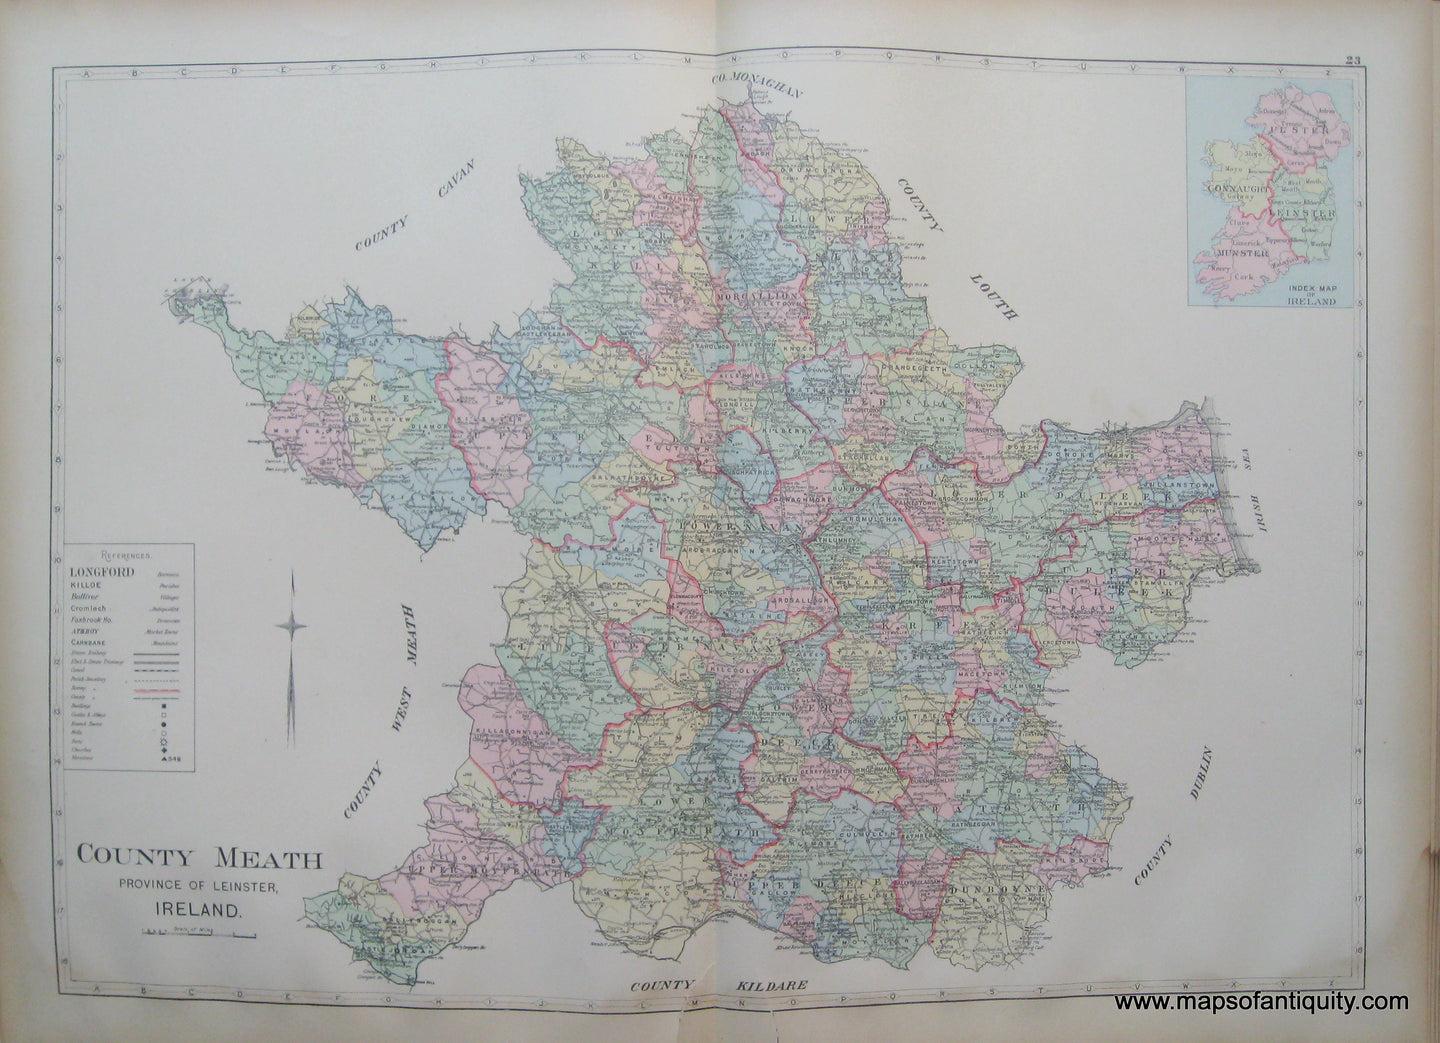 Antique-Map-County-Meath-Province-of-Leinster-Ireland.-Richards-1901-Maps-Of-Antiquity